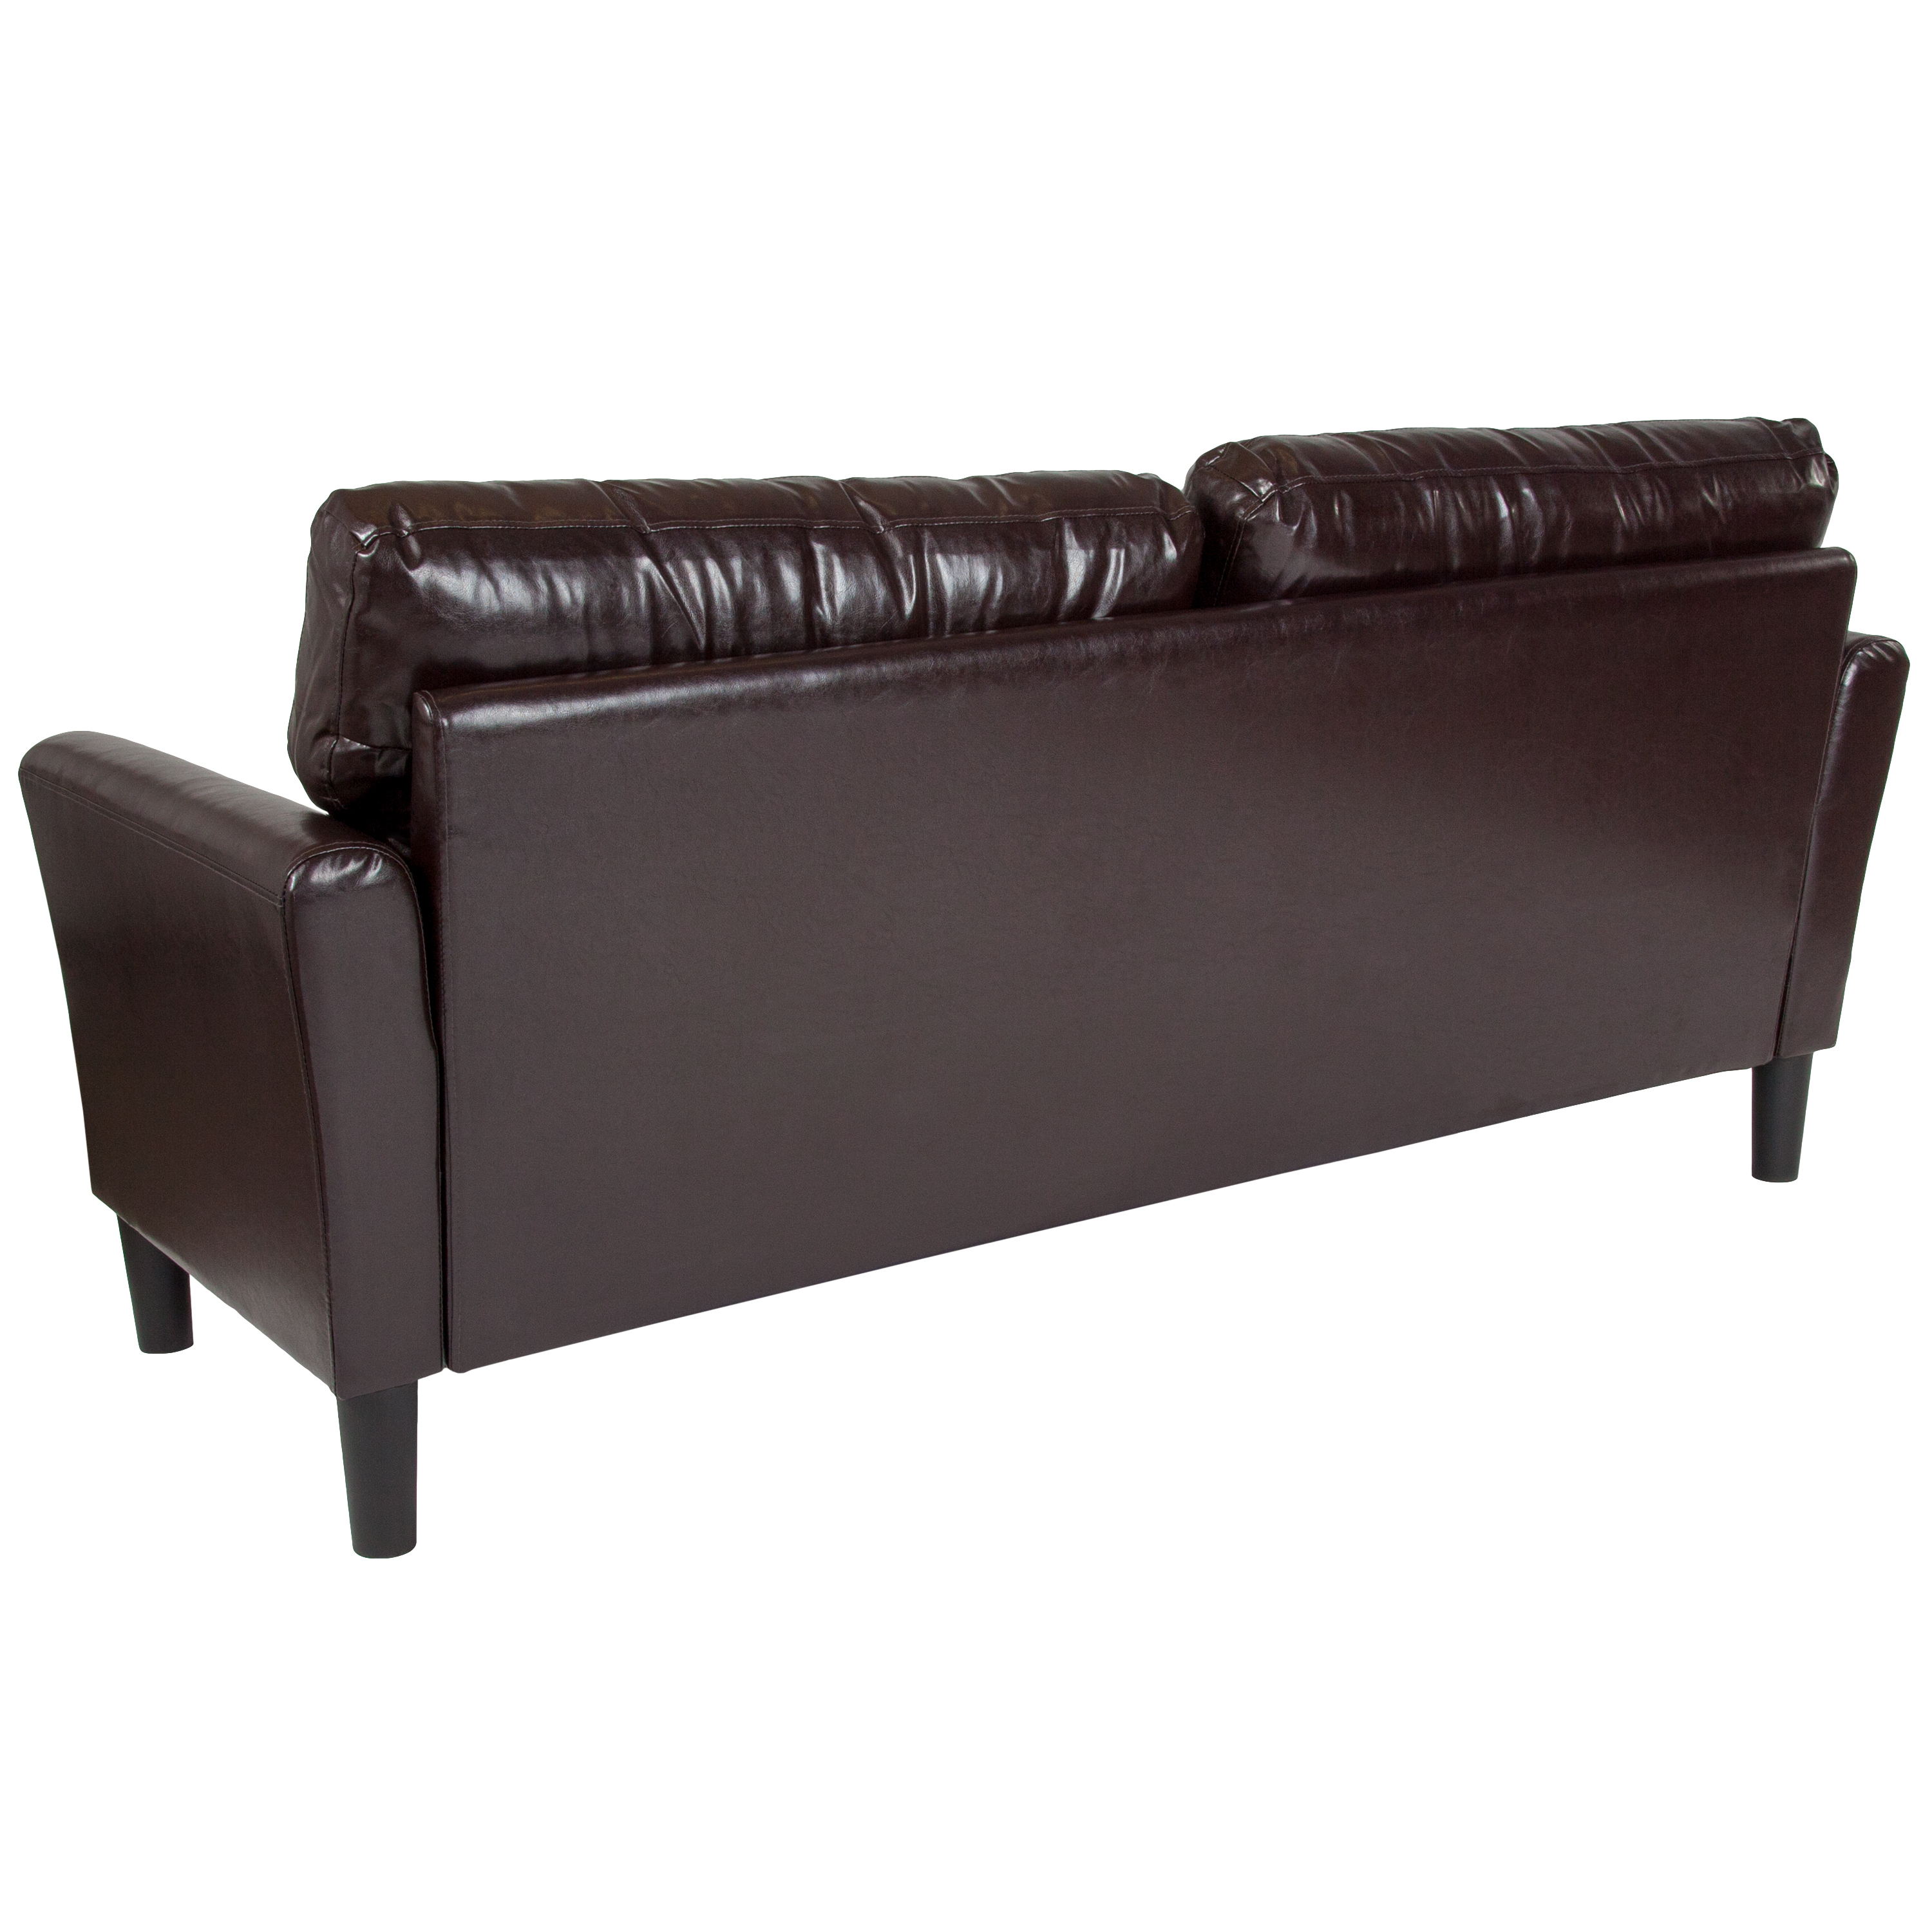 Flash Furniture Upholstered Living Room Sofa with Tailored Arms in Brown LeatherSoft - image 3 of 5